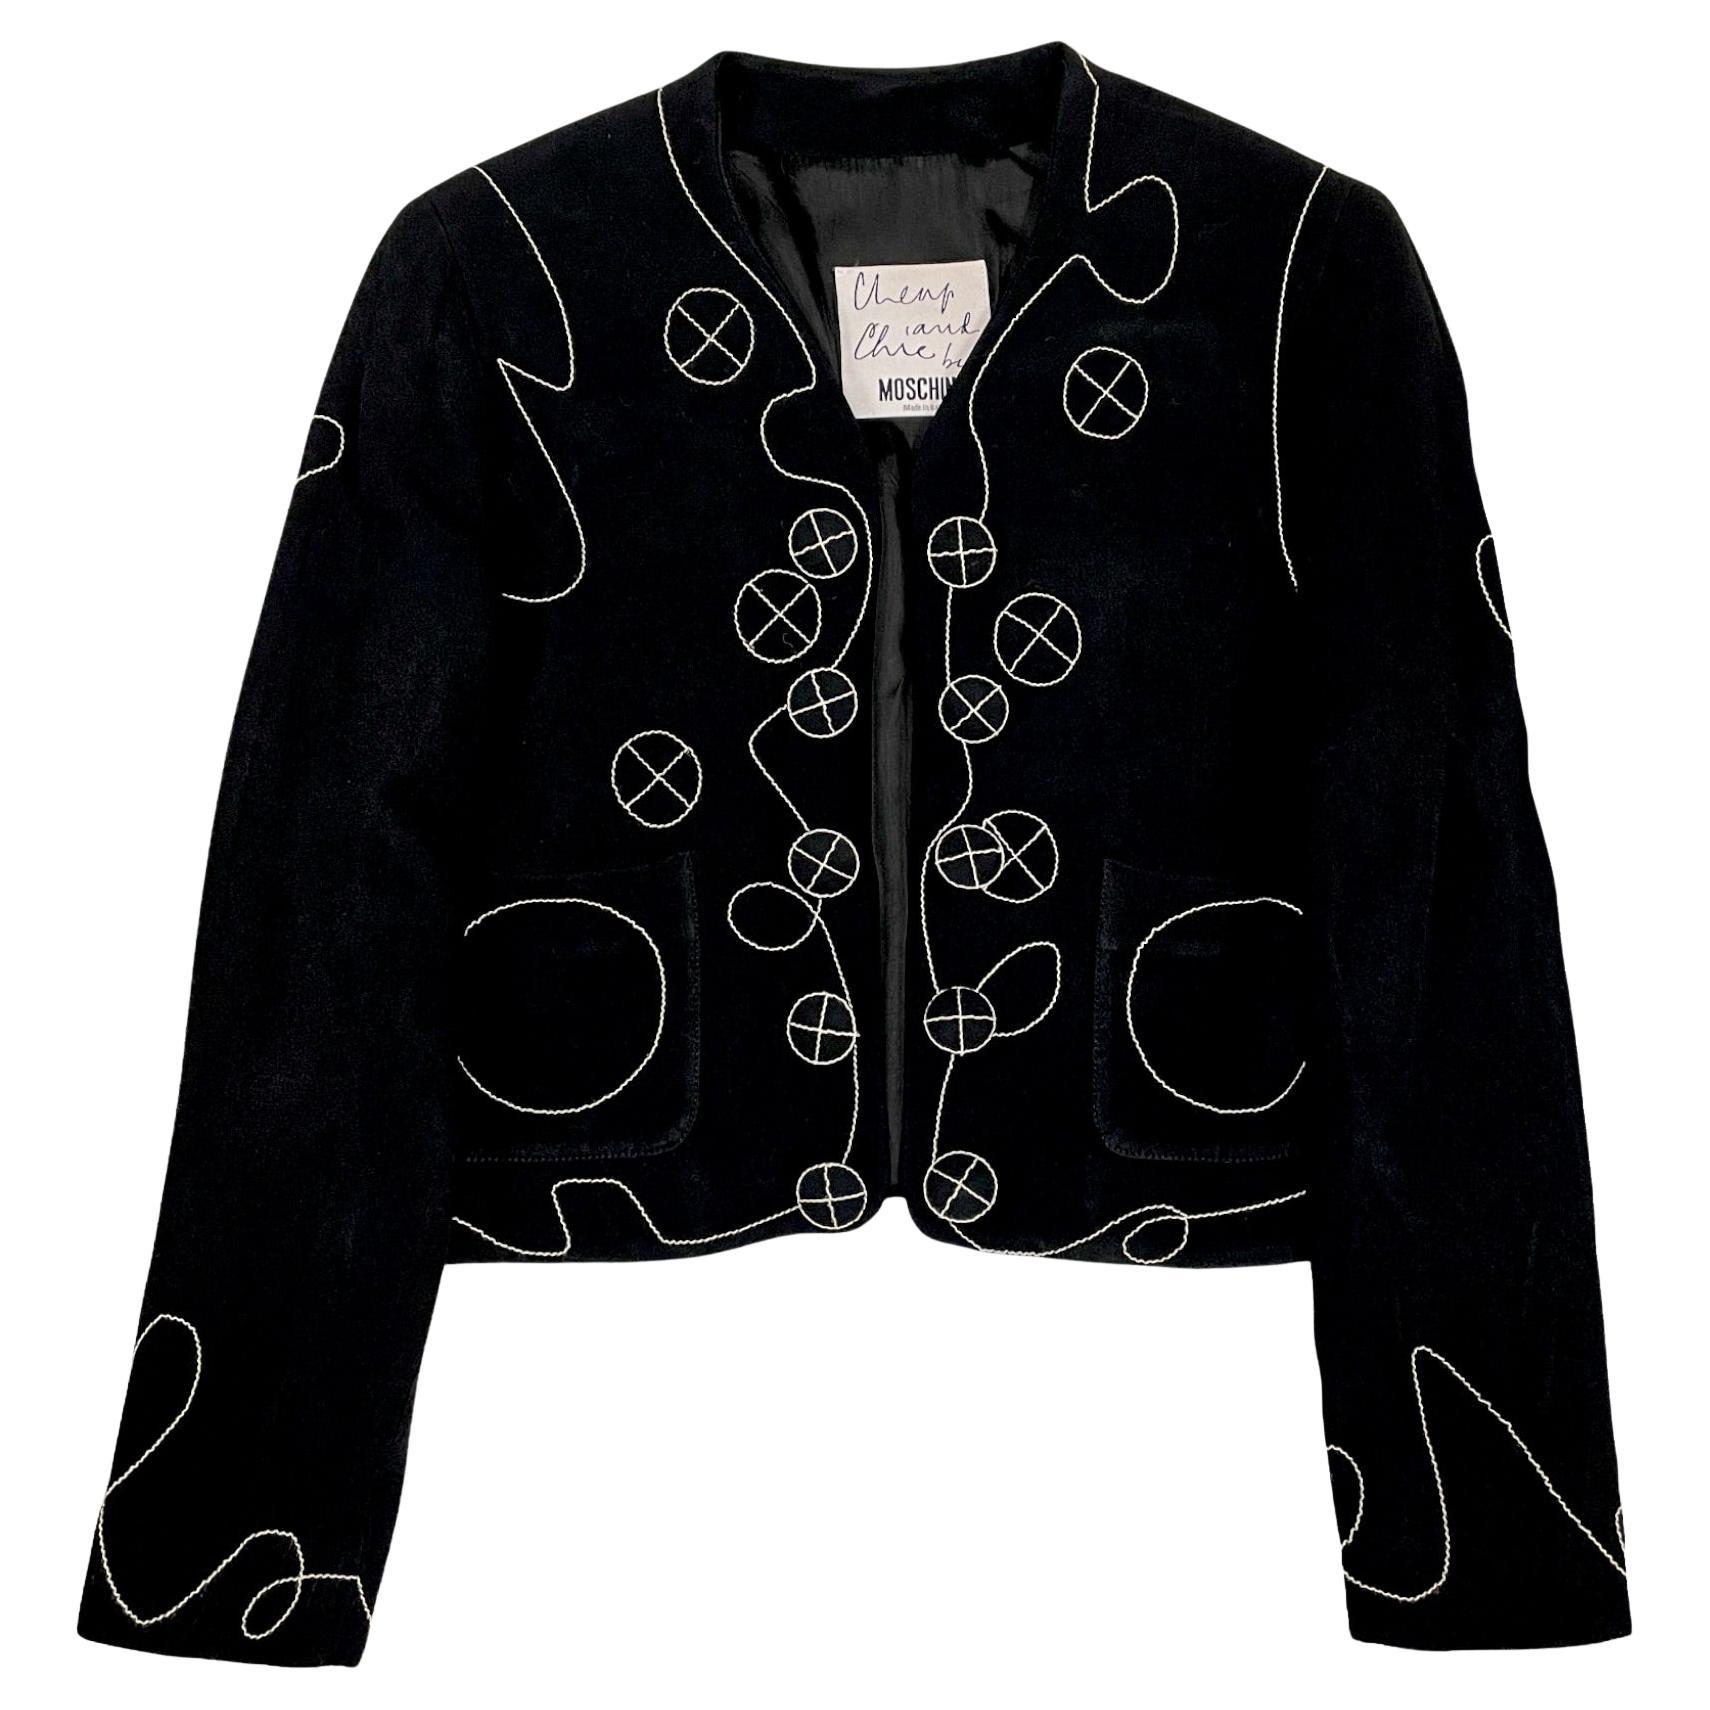 Moschino "Cheap and Chic" Embroidered Jacket 1990s